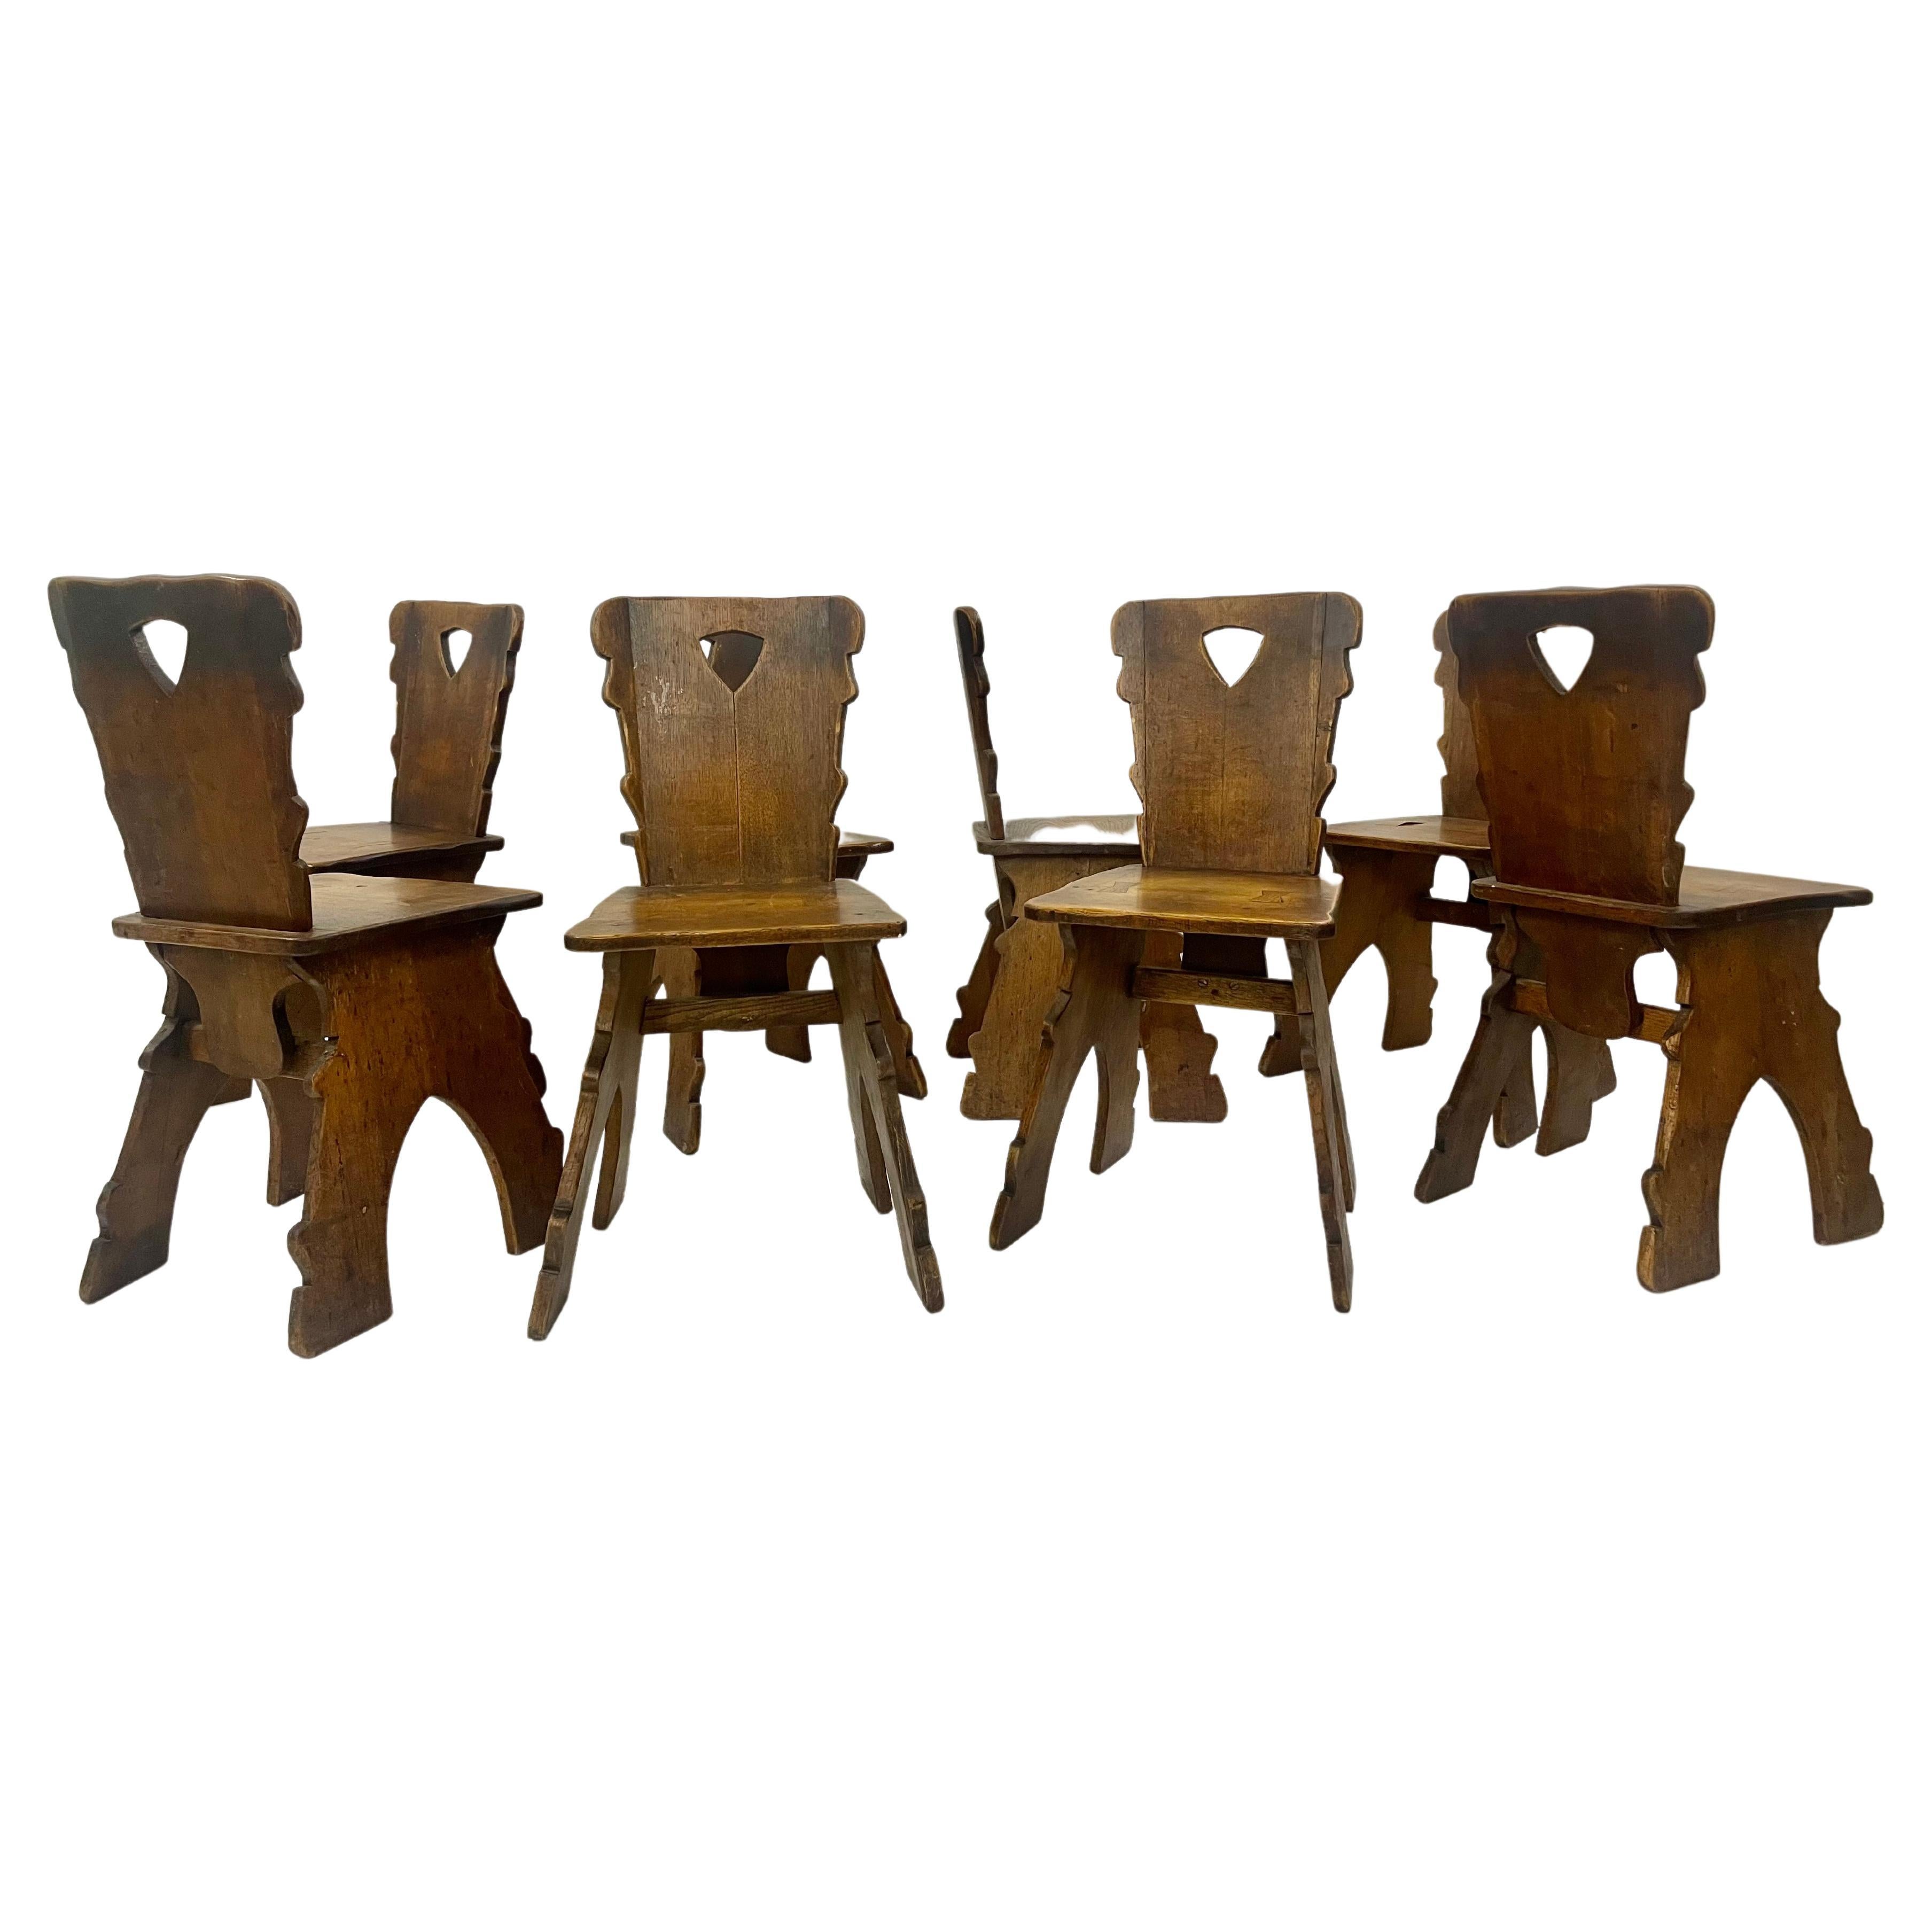 Set of 8 Brutalist Oak Chairs, 1940s For Sale